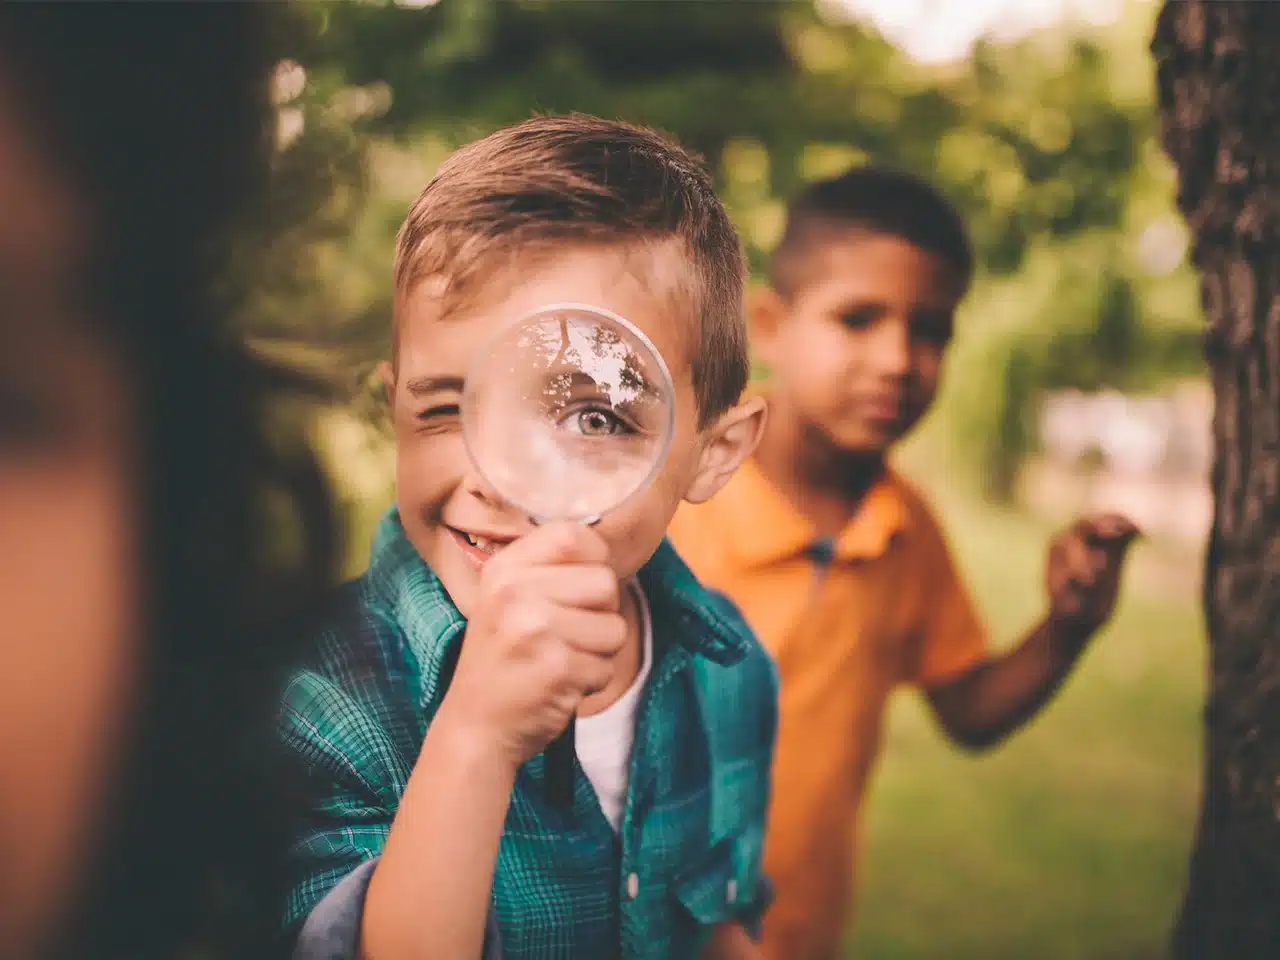 During a scavenger hunt in a public park, a boy holds a magnifying glass, exploring his surroundings with curiosity